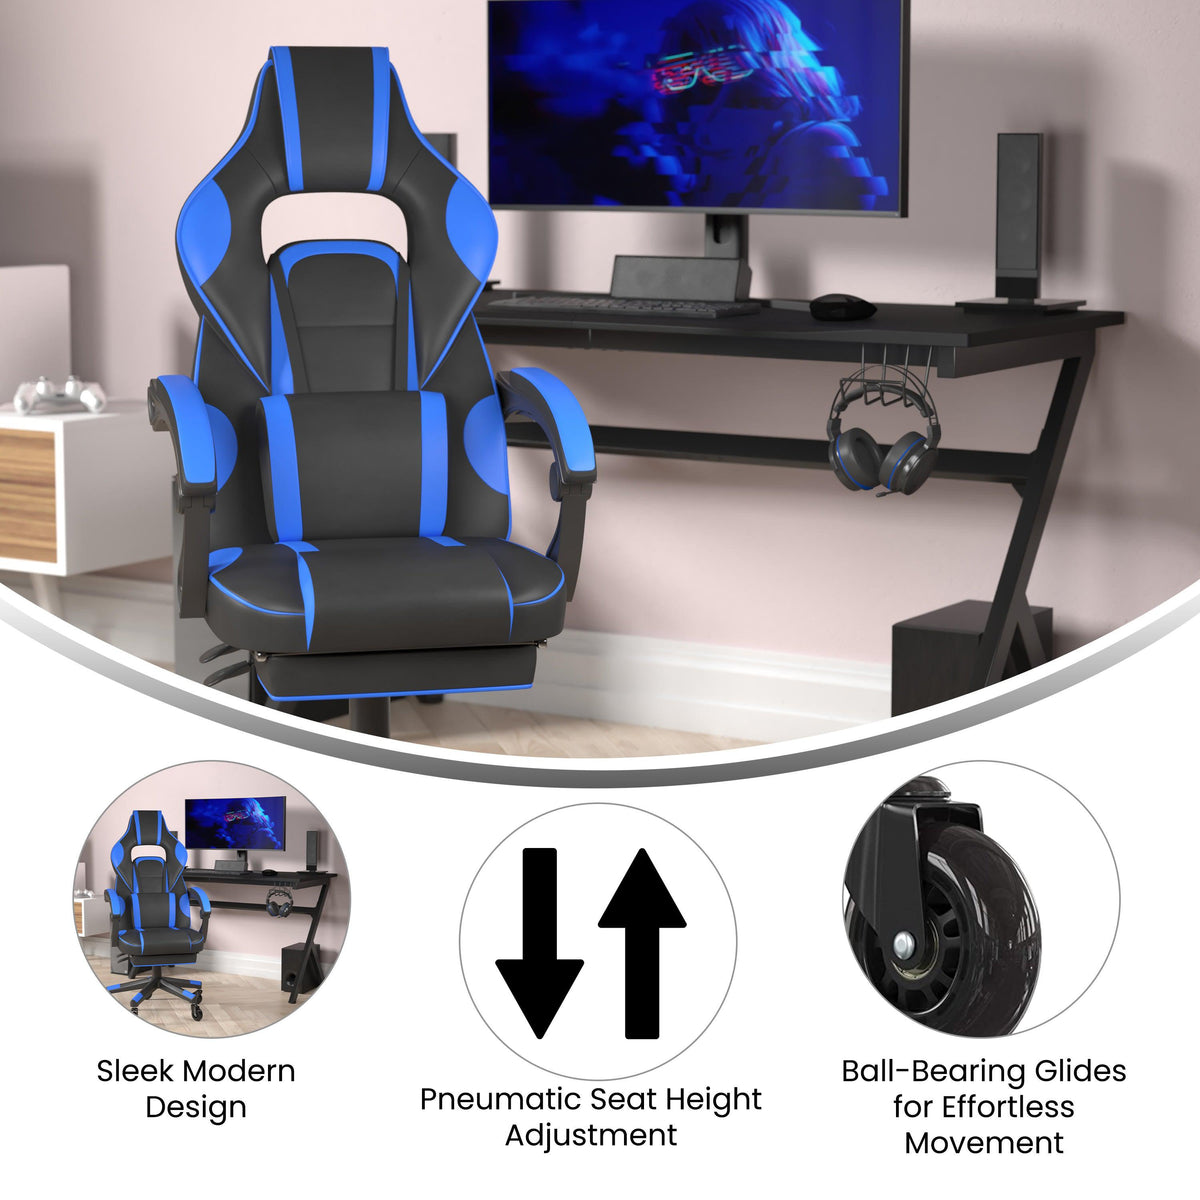 Black with Blue Trim |#| Office Gaming Chair with Skater Wheels & Reclining Arms - Blue LeatherSoft